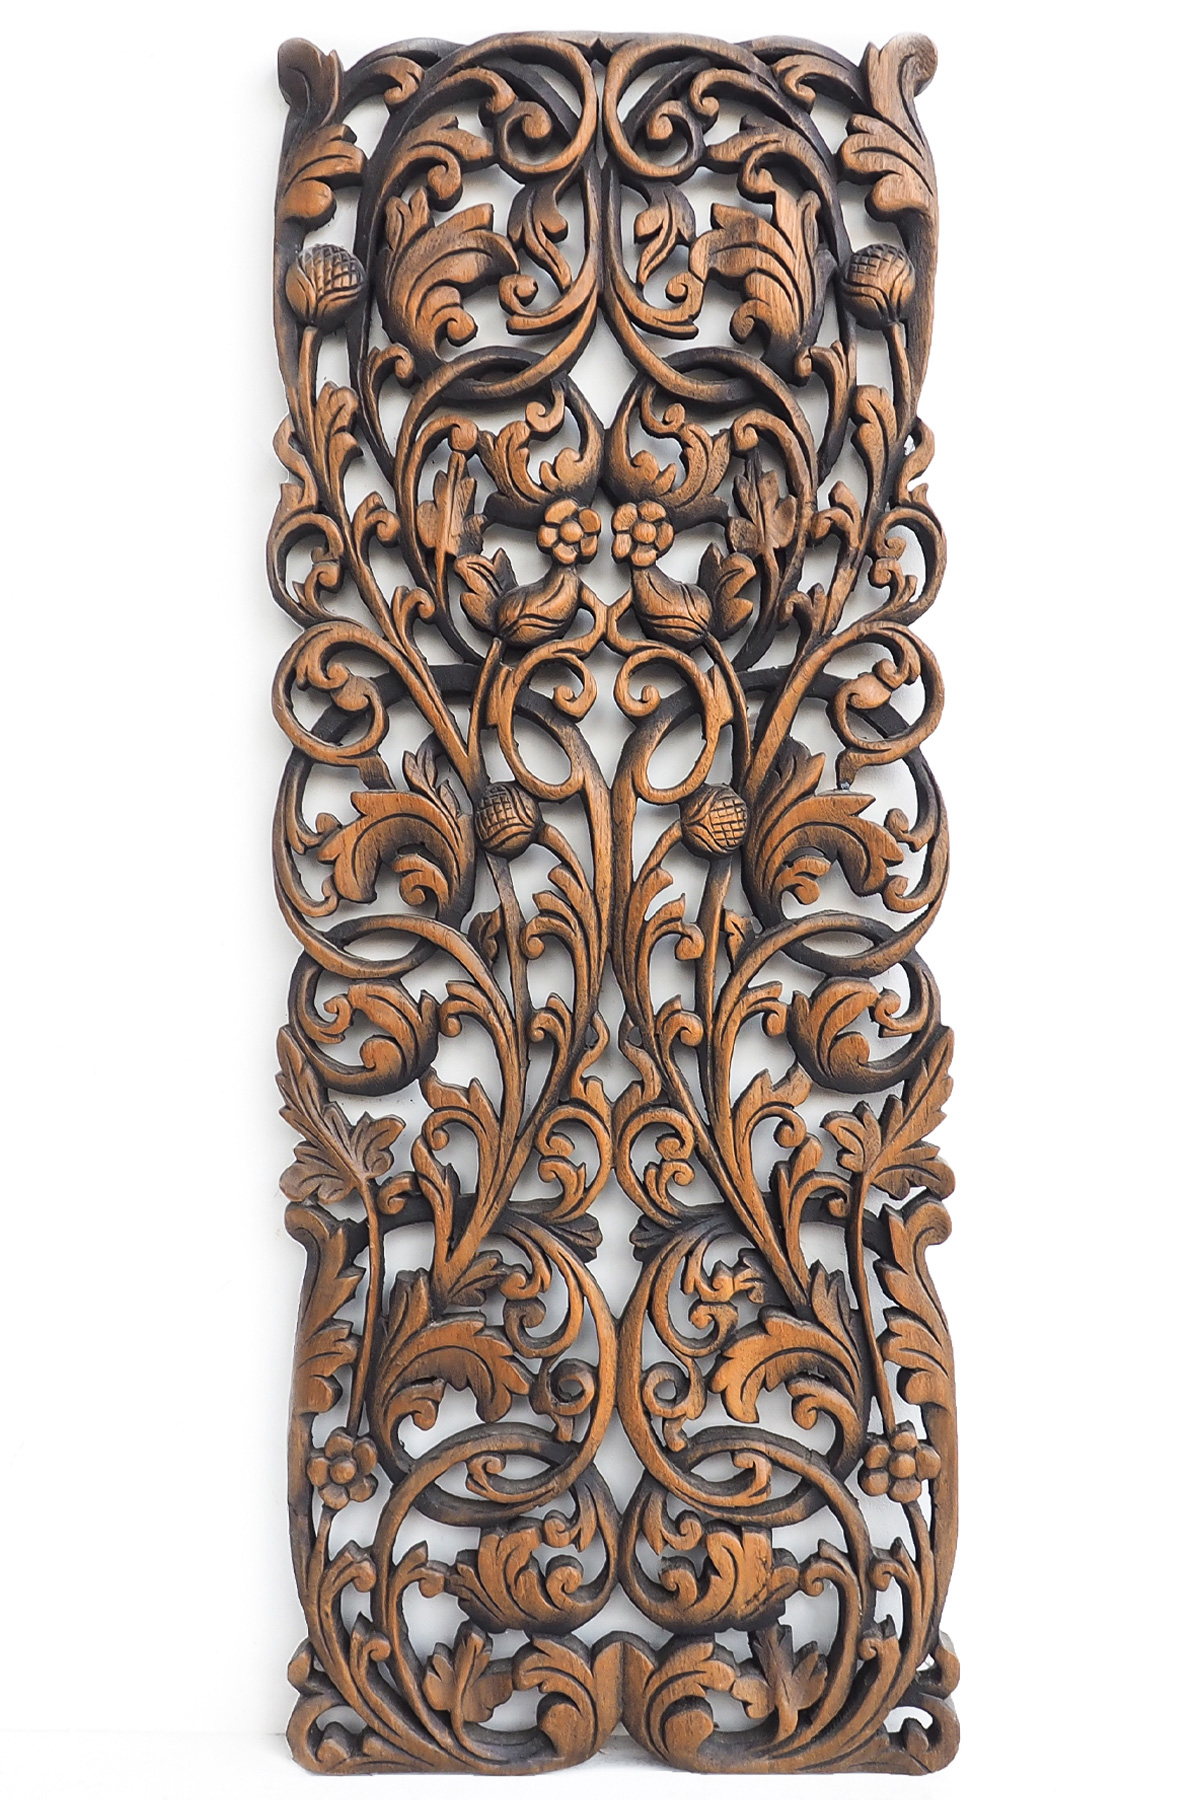 Tophane Carved Wood Wall Hanging, Wooden Carved Wall Art